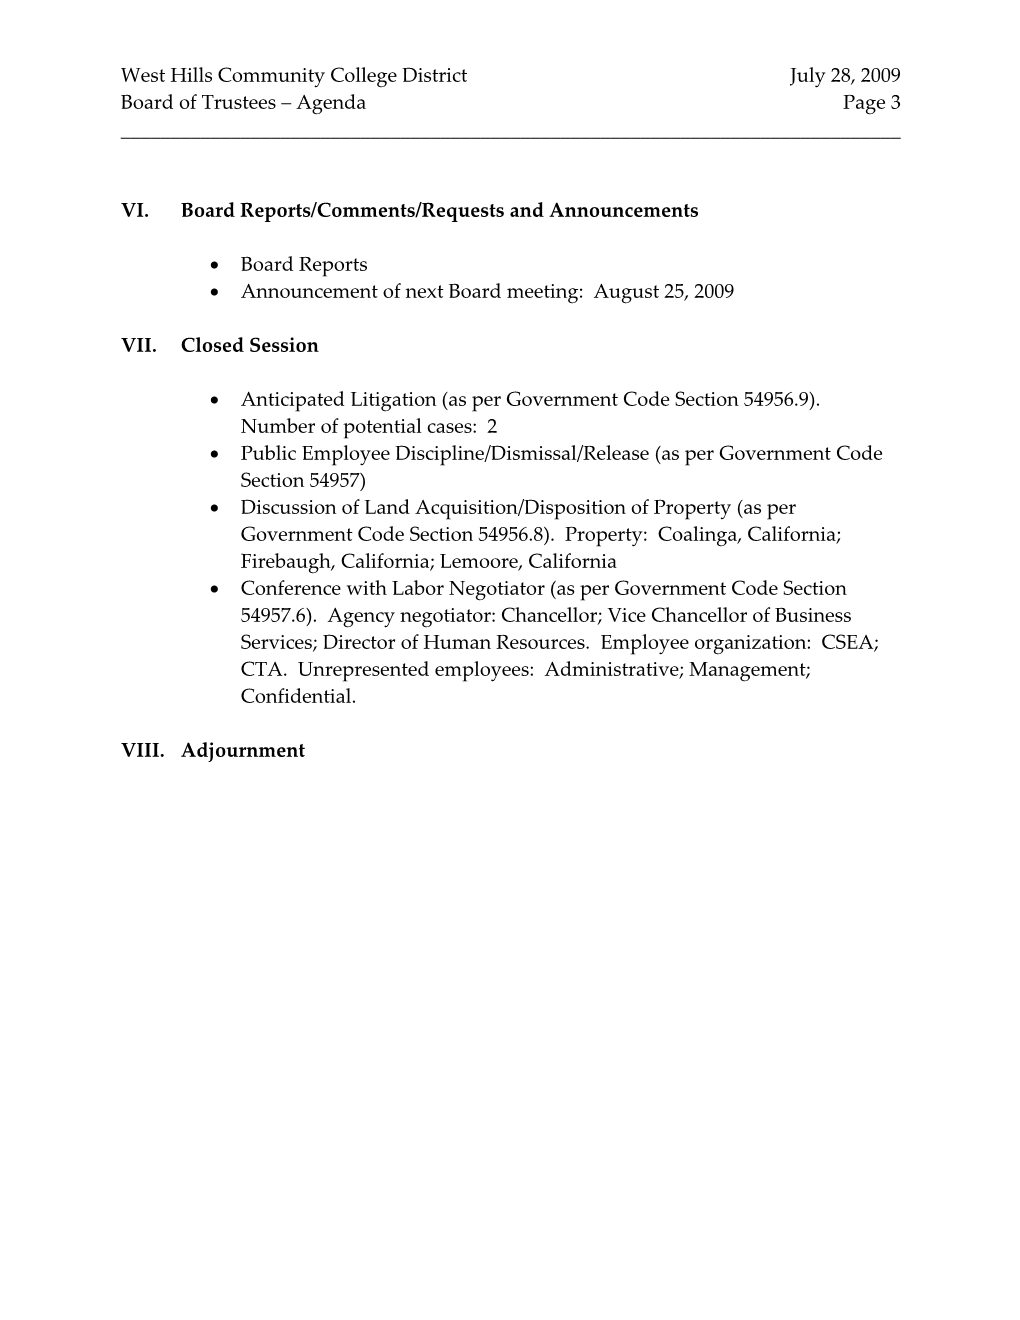 Agenda of the Regular Meeting of the Governing Board